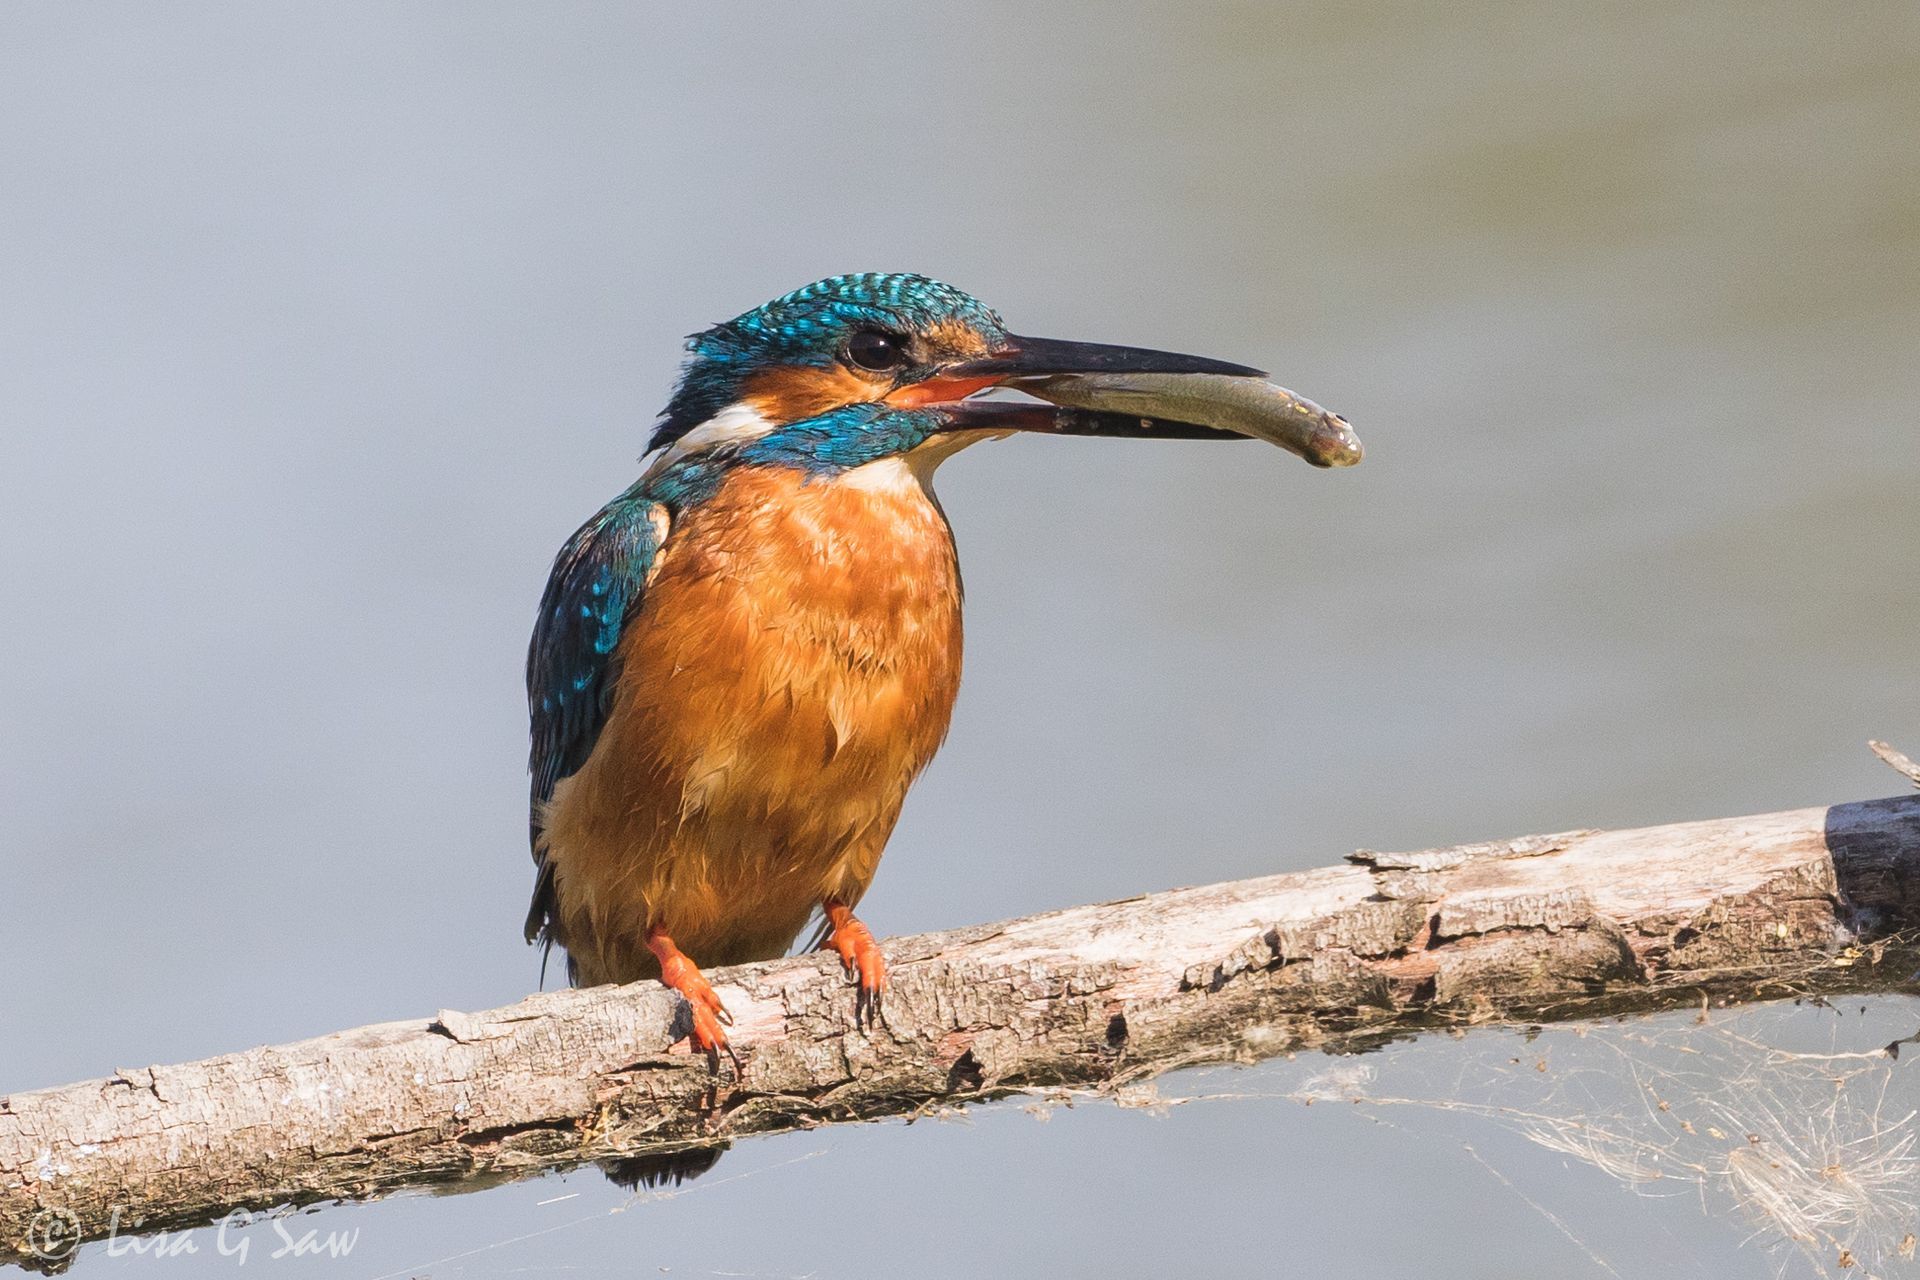 Kingfisher with a small fish in its beak